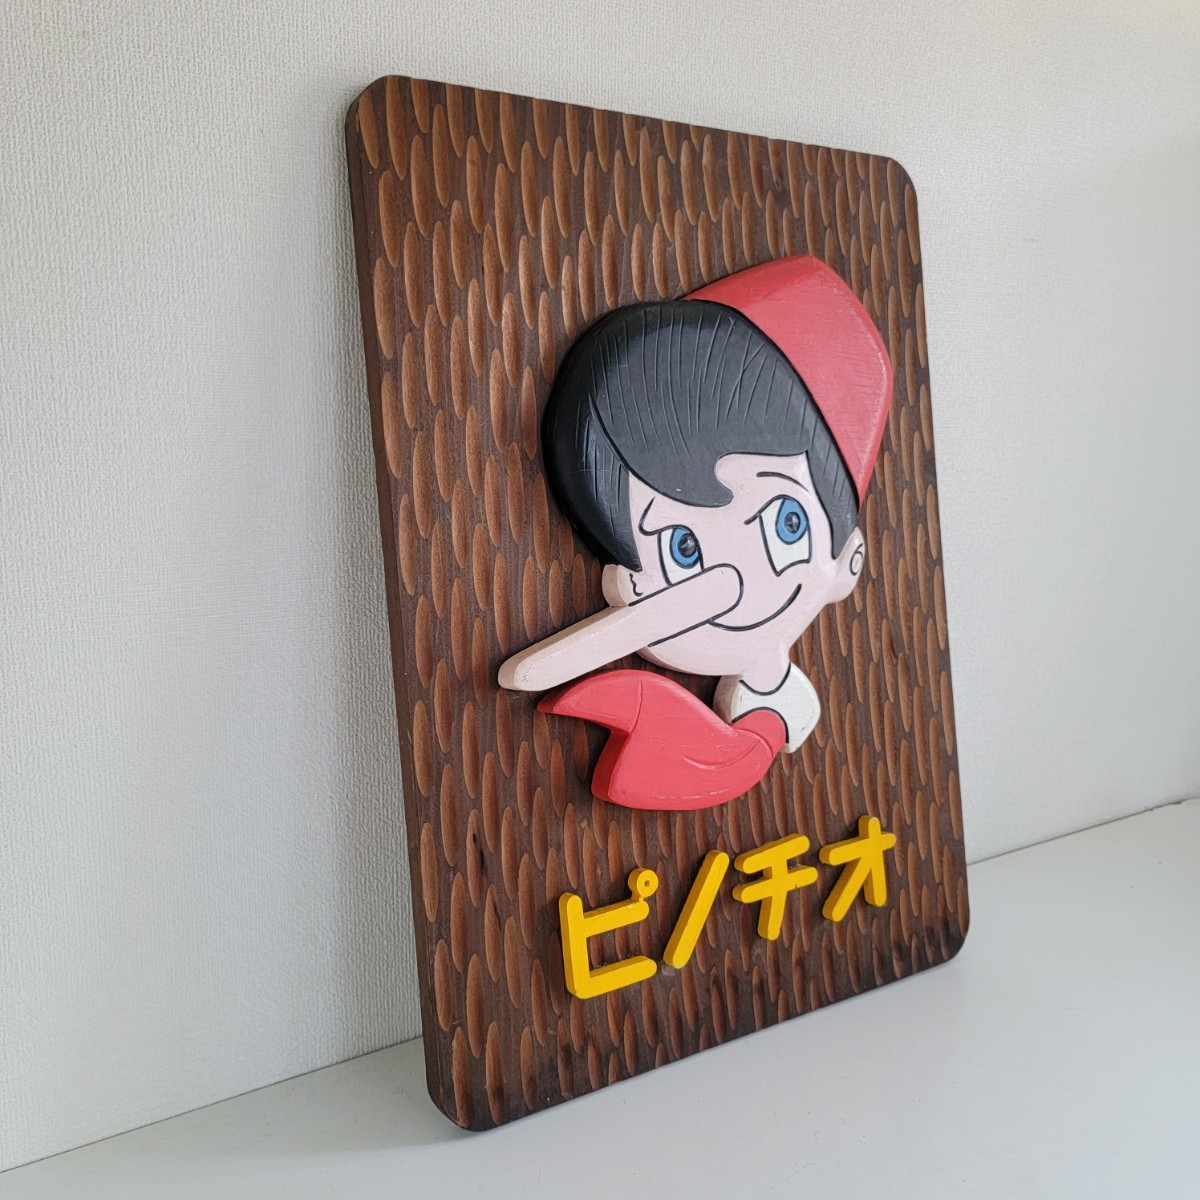  hill . corporation Showa Retro Pinot chio tree carving wooden signboard child Western-style clothes brand enterprise thing interior antique Vintage objet d'art inspection Pinocchio 